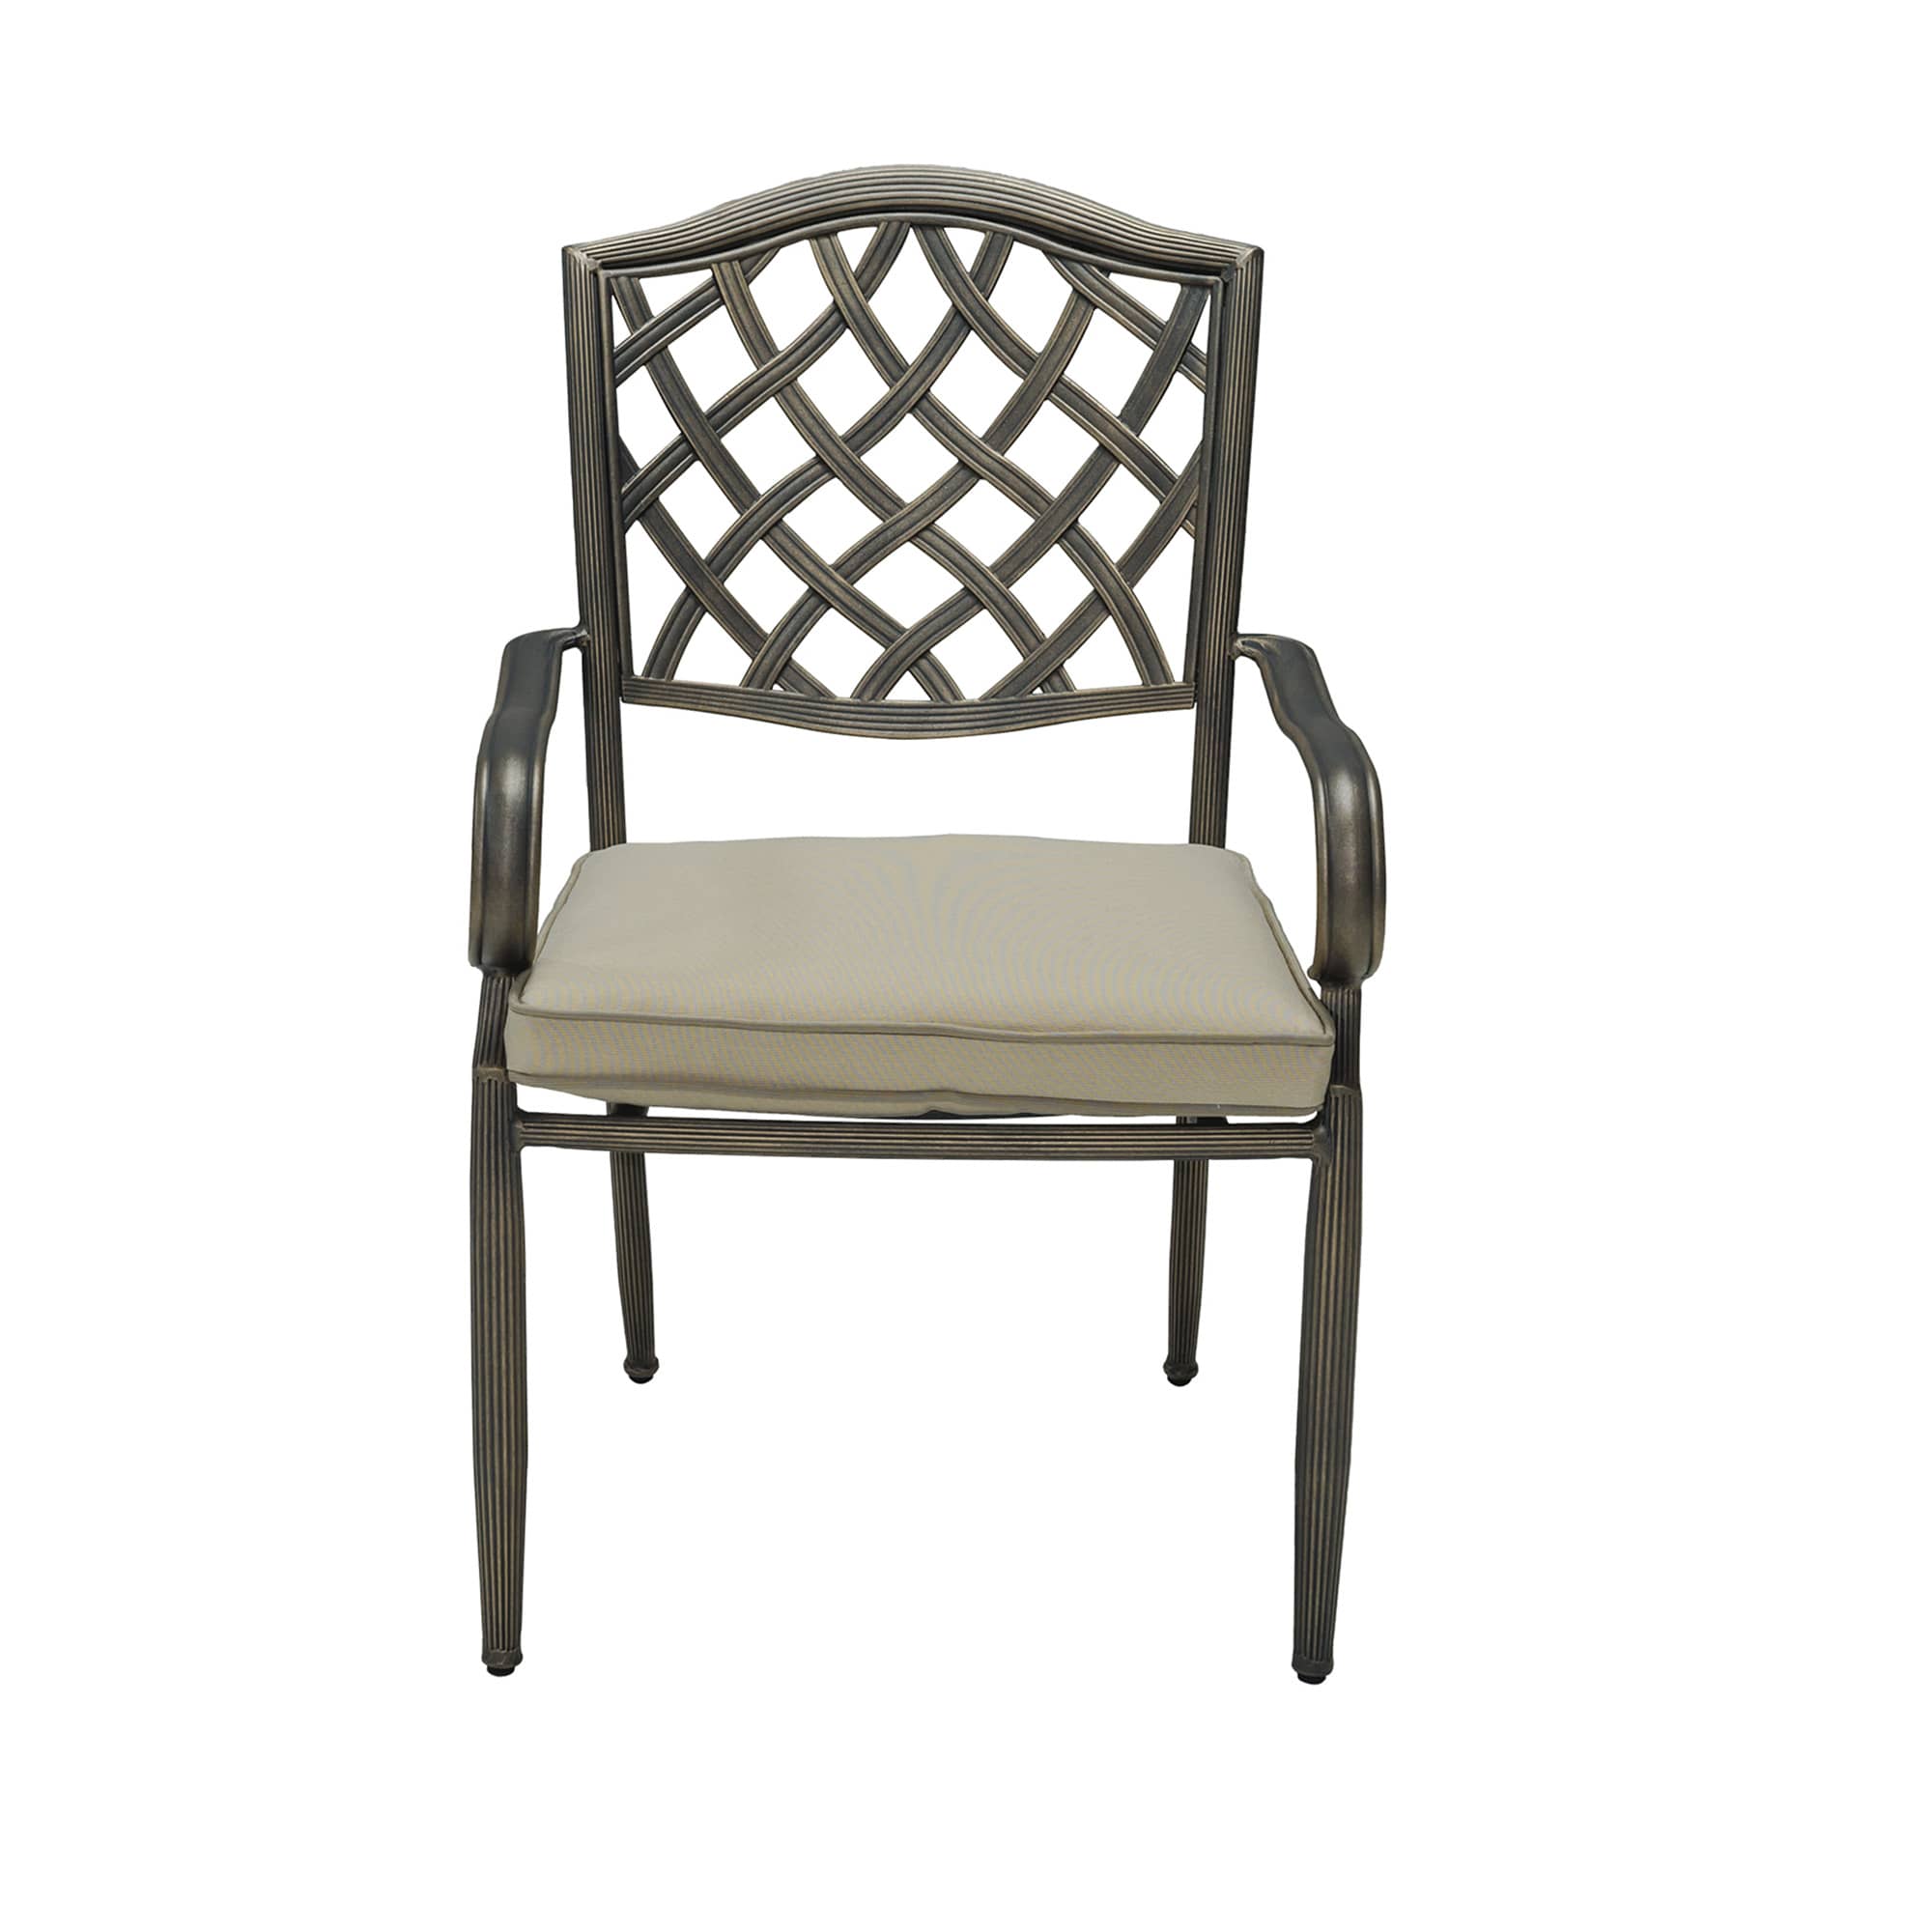 CASAINC 4-Piece Brown Cast Aluminum Outdoor Arm Dining Chair Patio Bistro Chairs with Beige Cushion